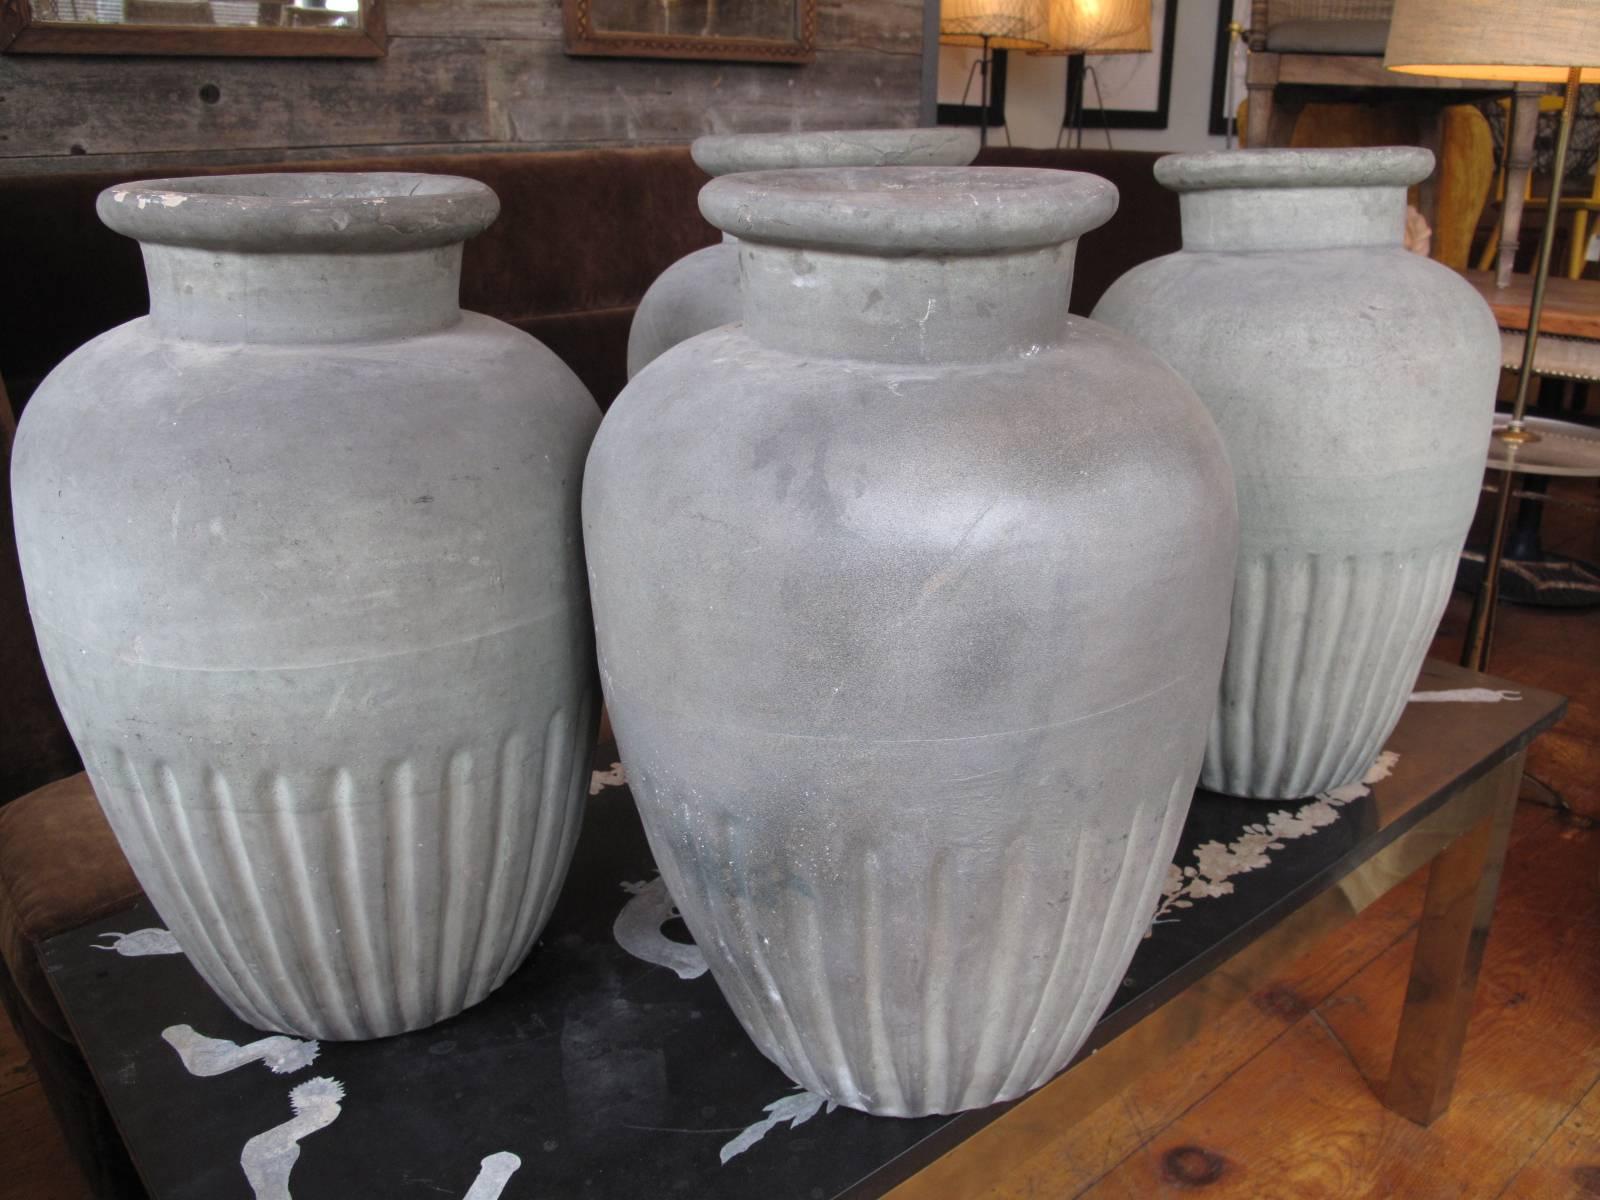 Four similar handmade urns with original zinc inserts. Subtle color shift in glaze on lower portion. Likely late 19th century, though undated. Listed as a set of four but we may consider offers on pairs only. 

Measurements of each vase vary